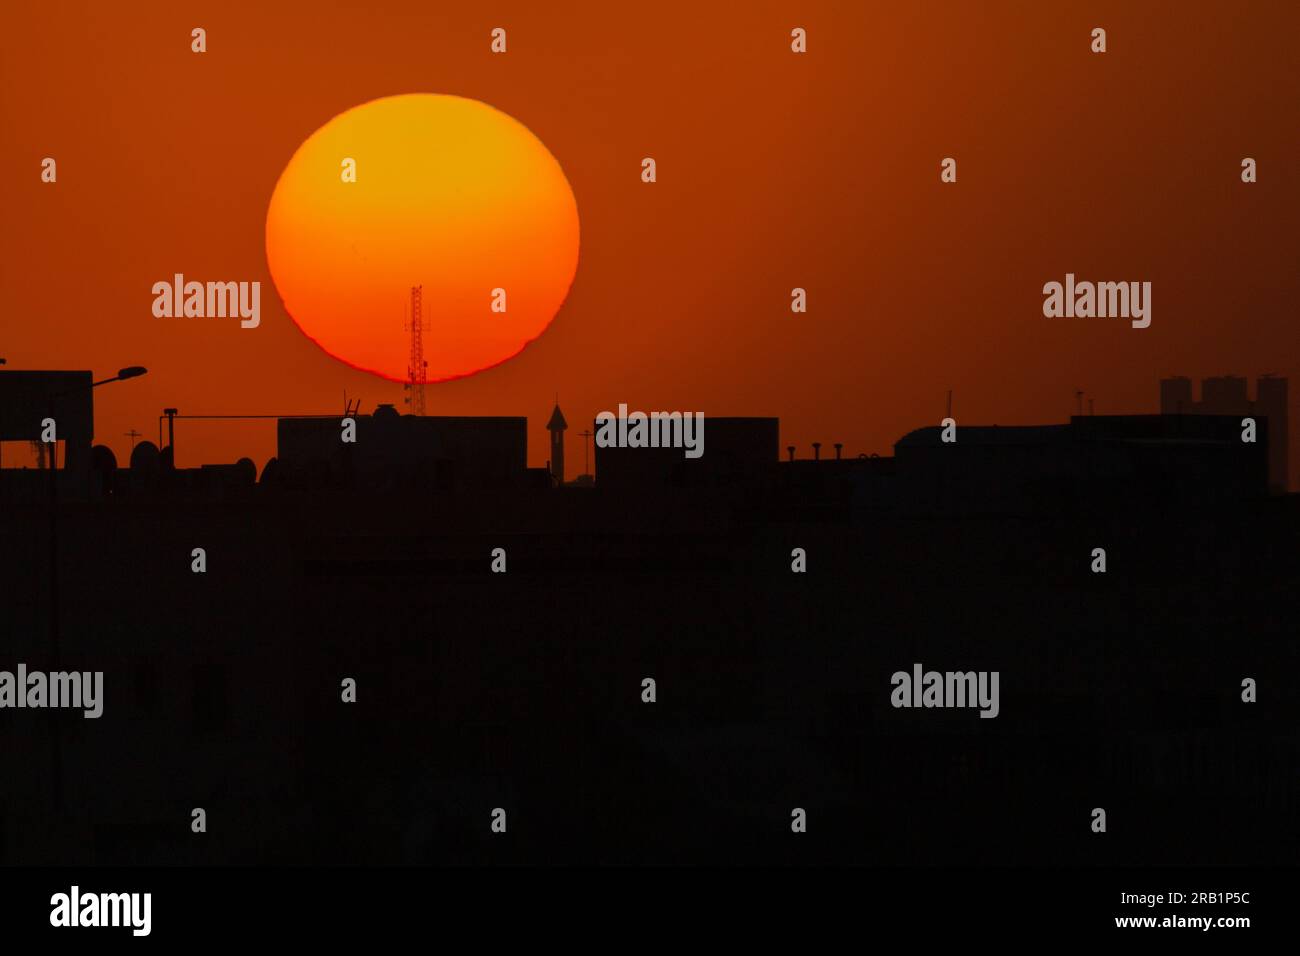 Sunset over the city, Silhouette of a building. Stock Photo